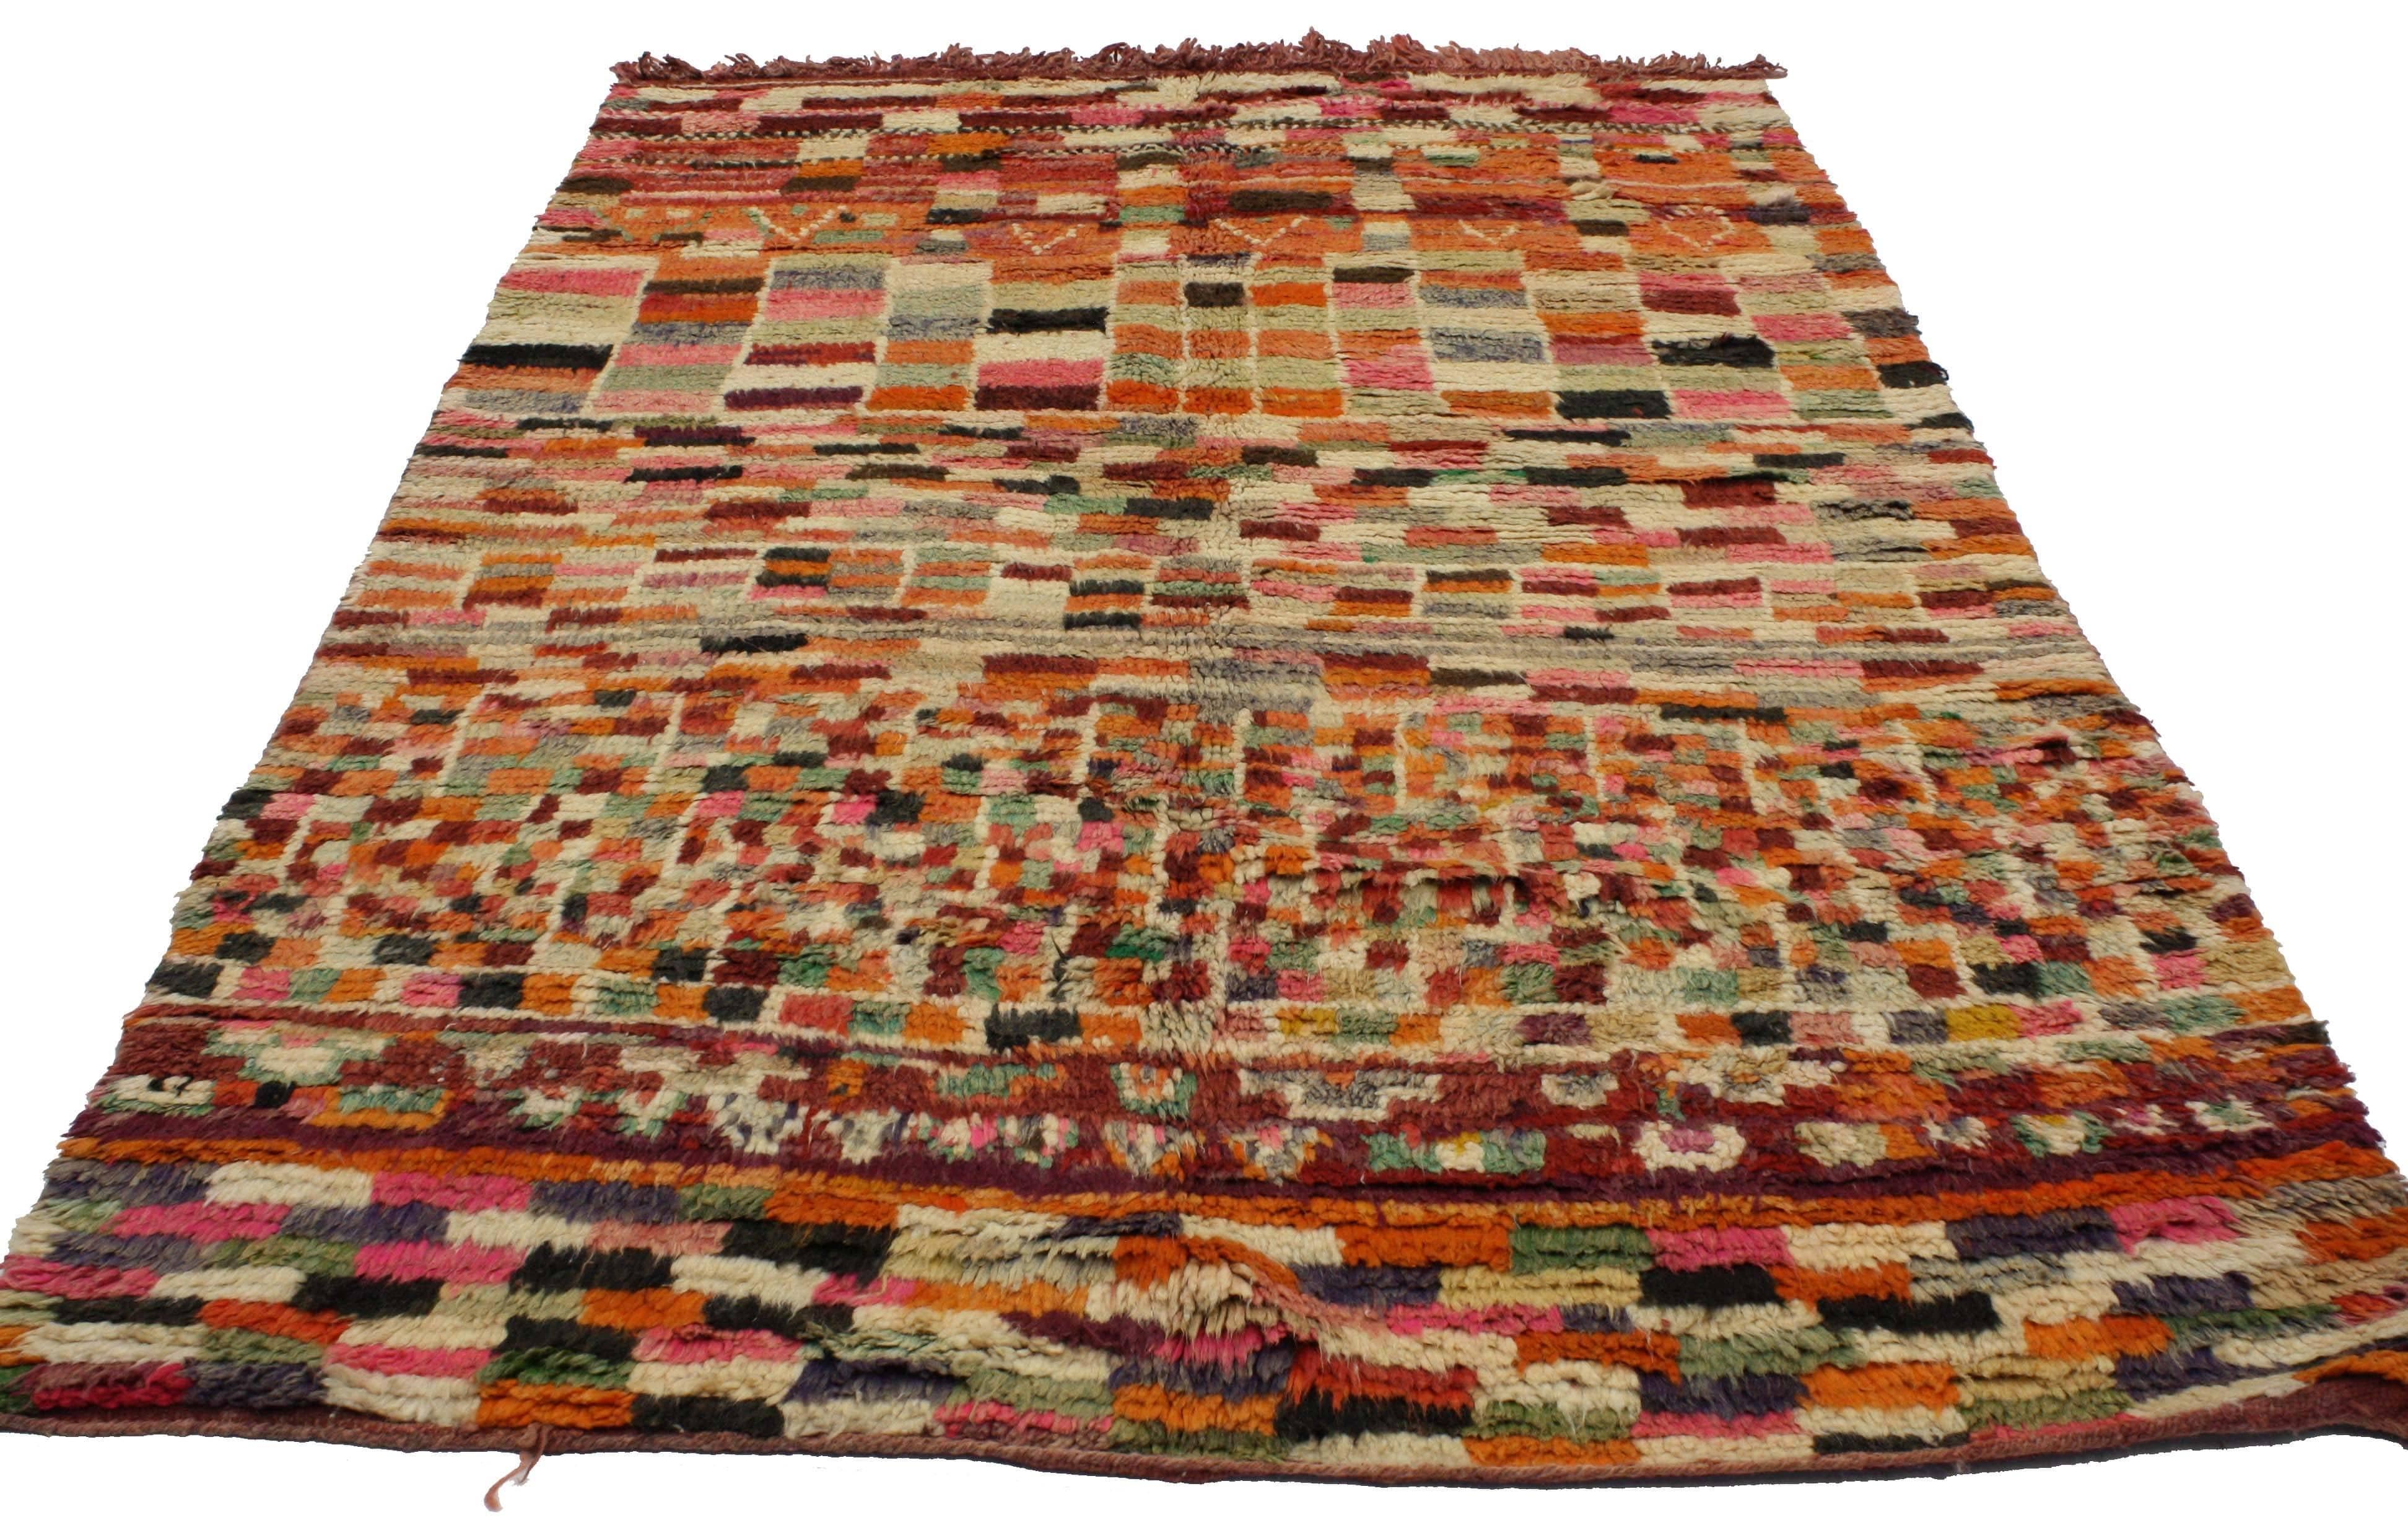 Hand-Knotted Vintage Berber Moroccan Rehamna Rug with Post-Modern, Bauhaus Cubism Style